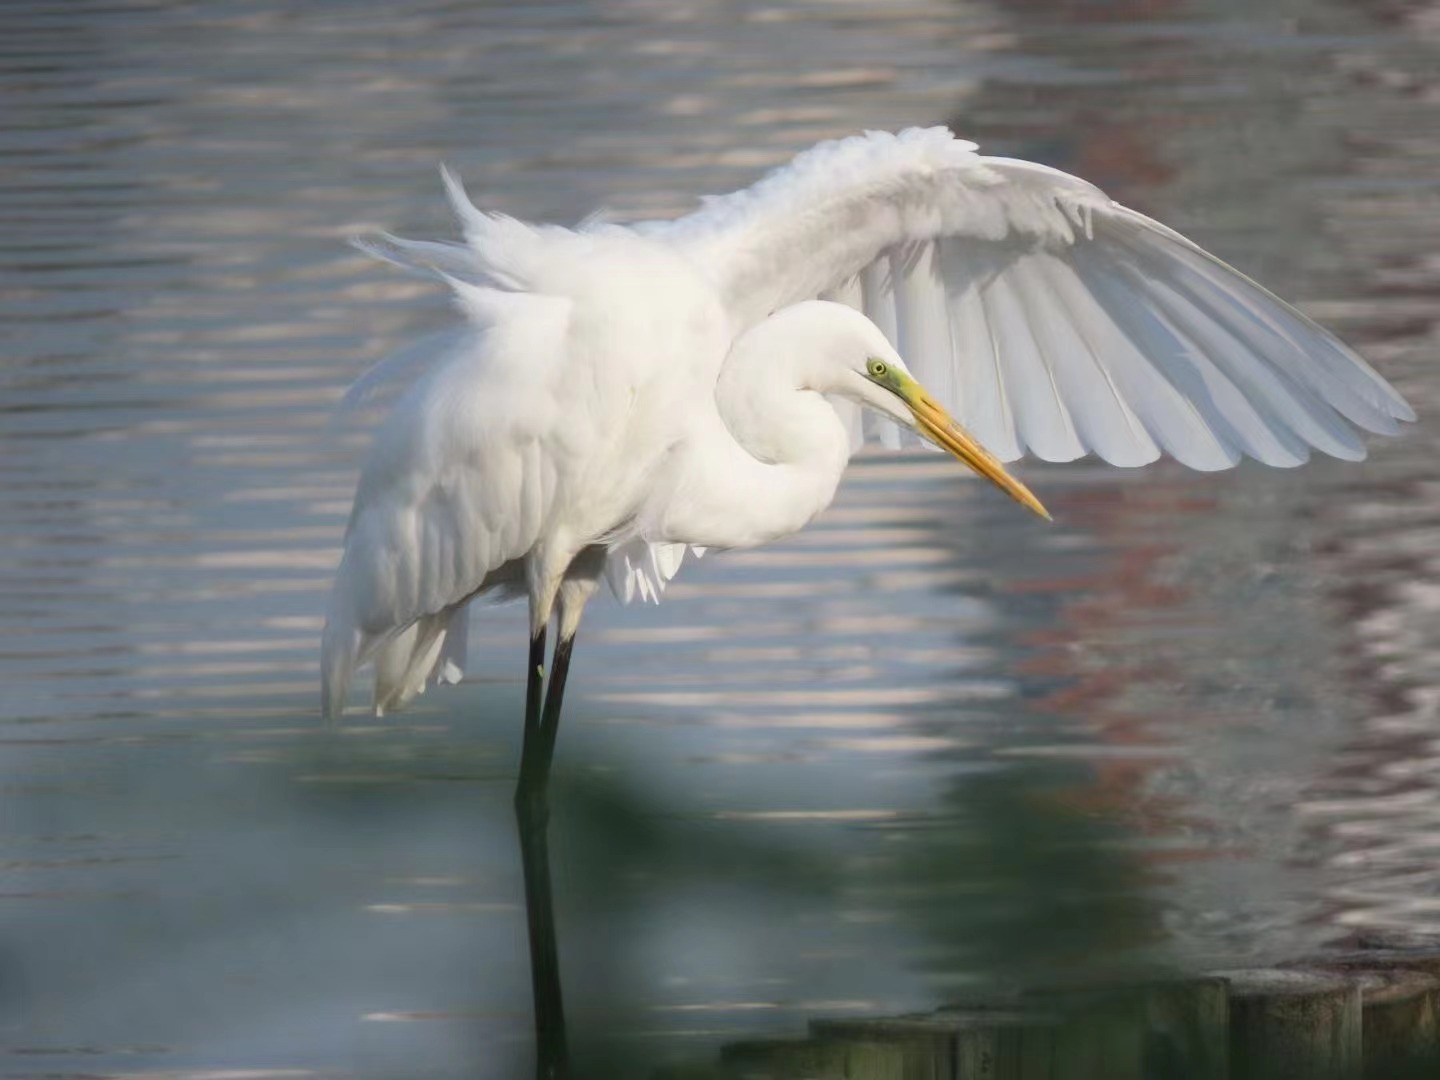 An egret grooming itself in the water.